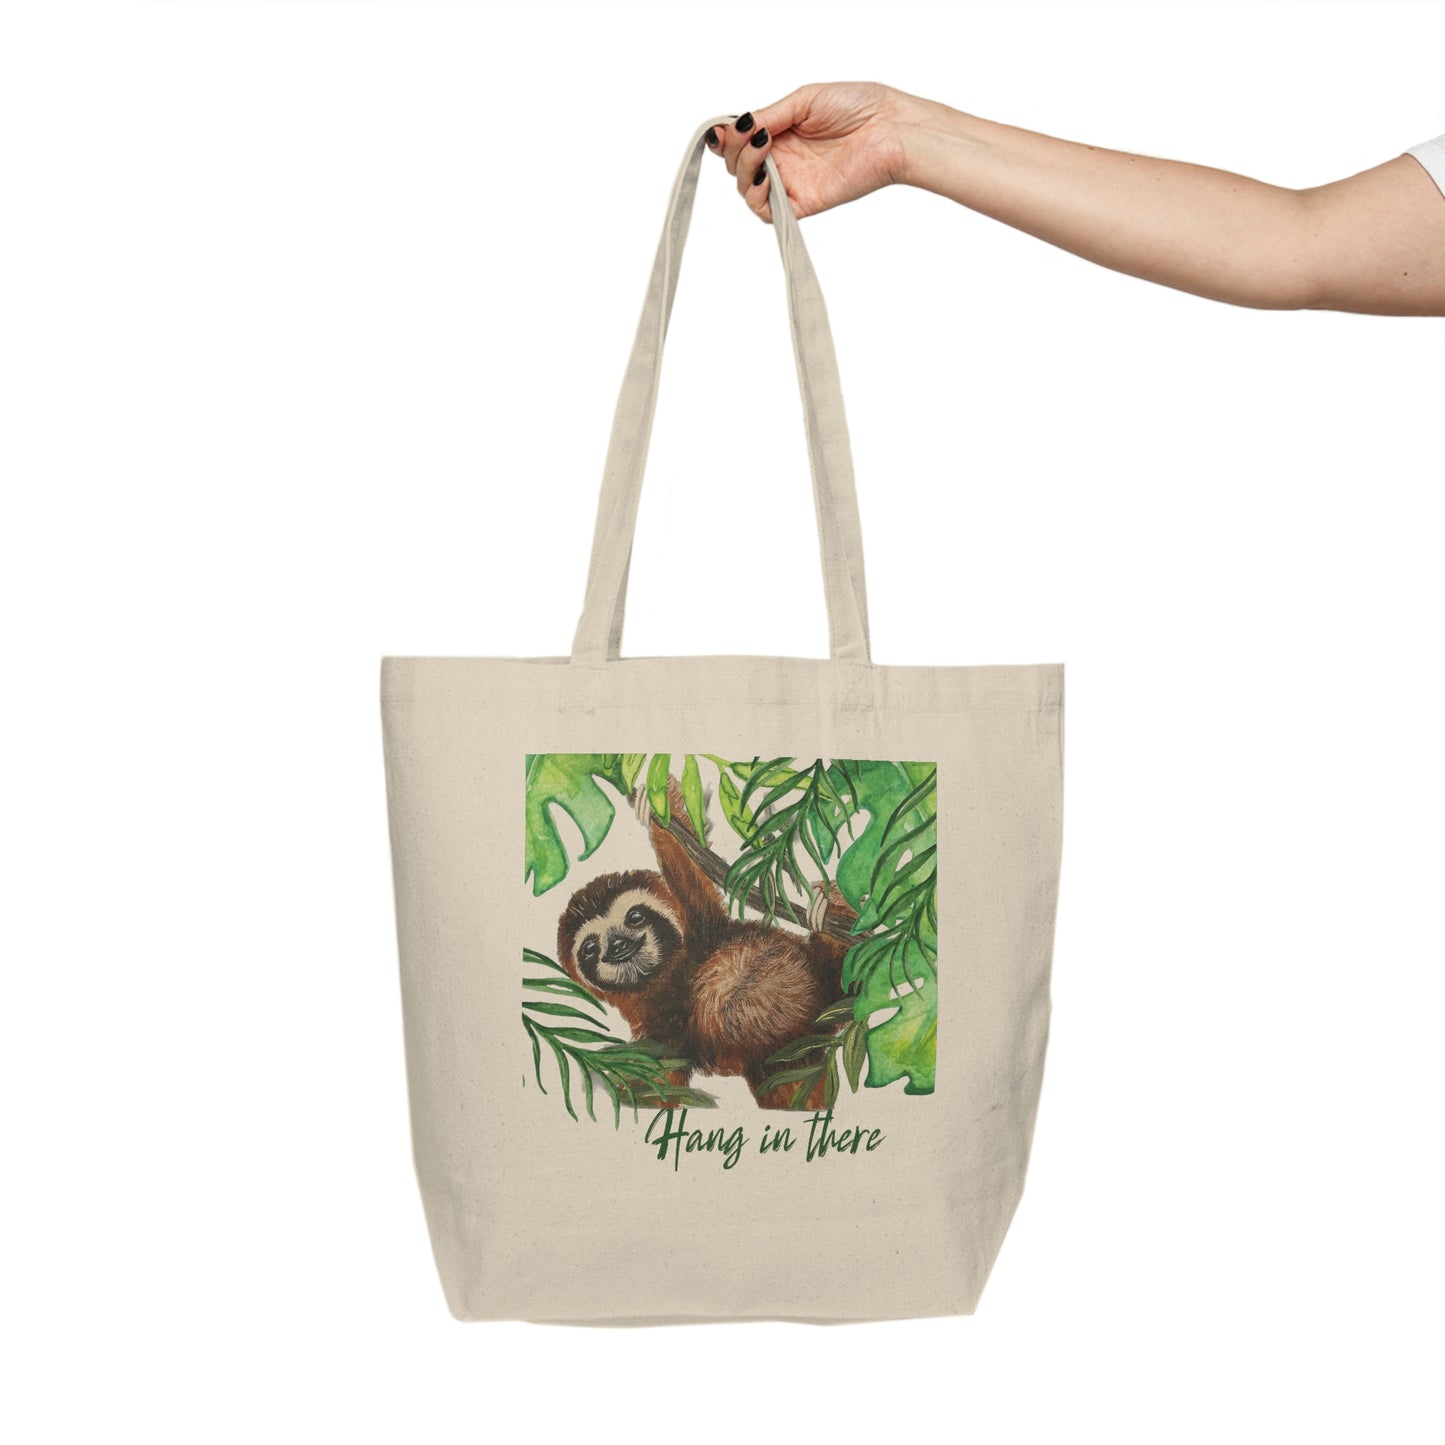 Hang In There - Canvas Shopping Tote